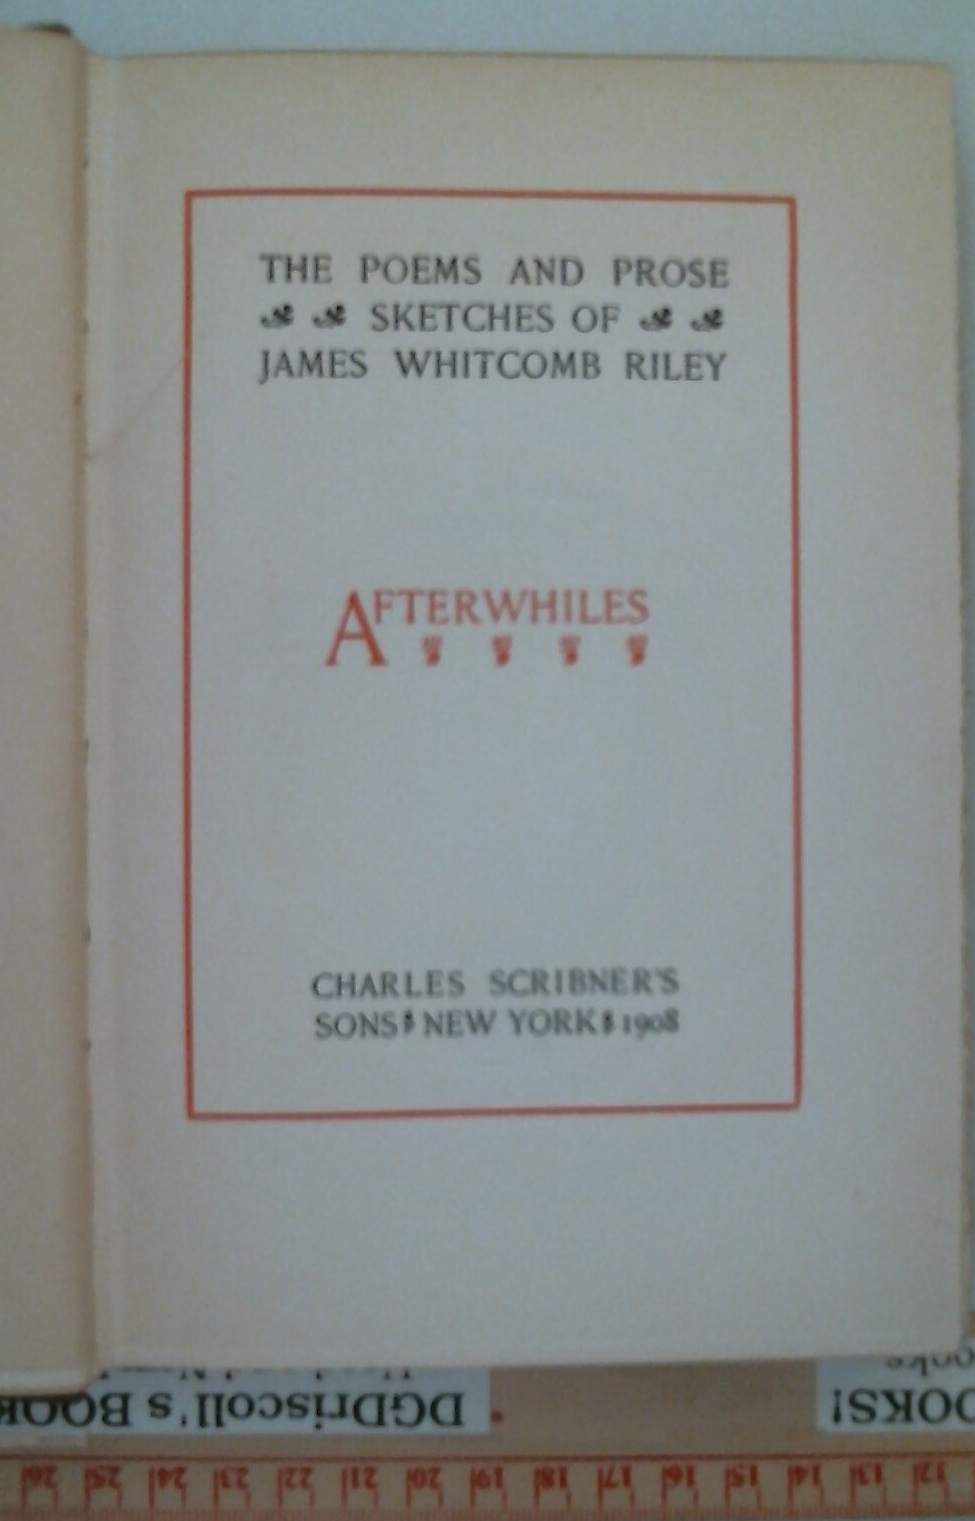 The Works of James Whitcomb Riley Volume III Afterwhiles